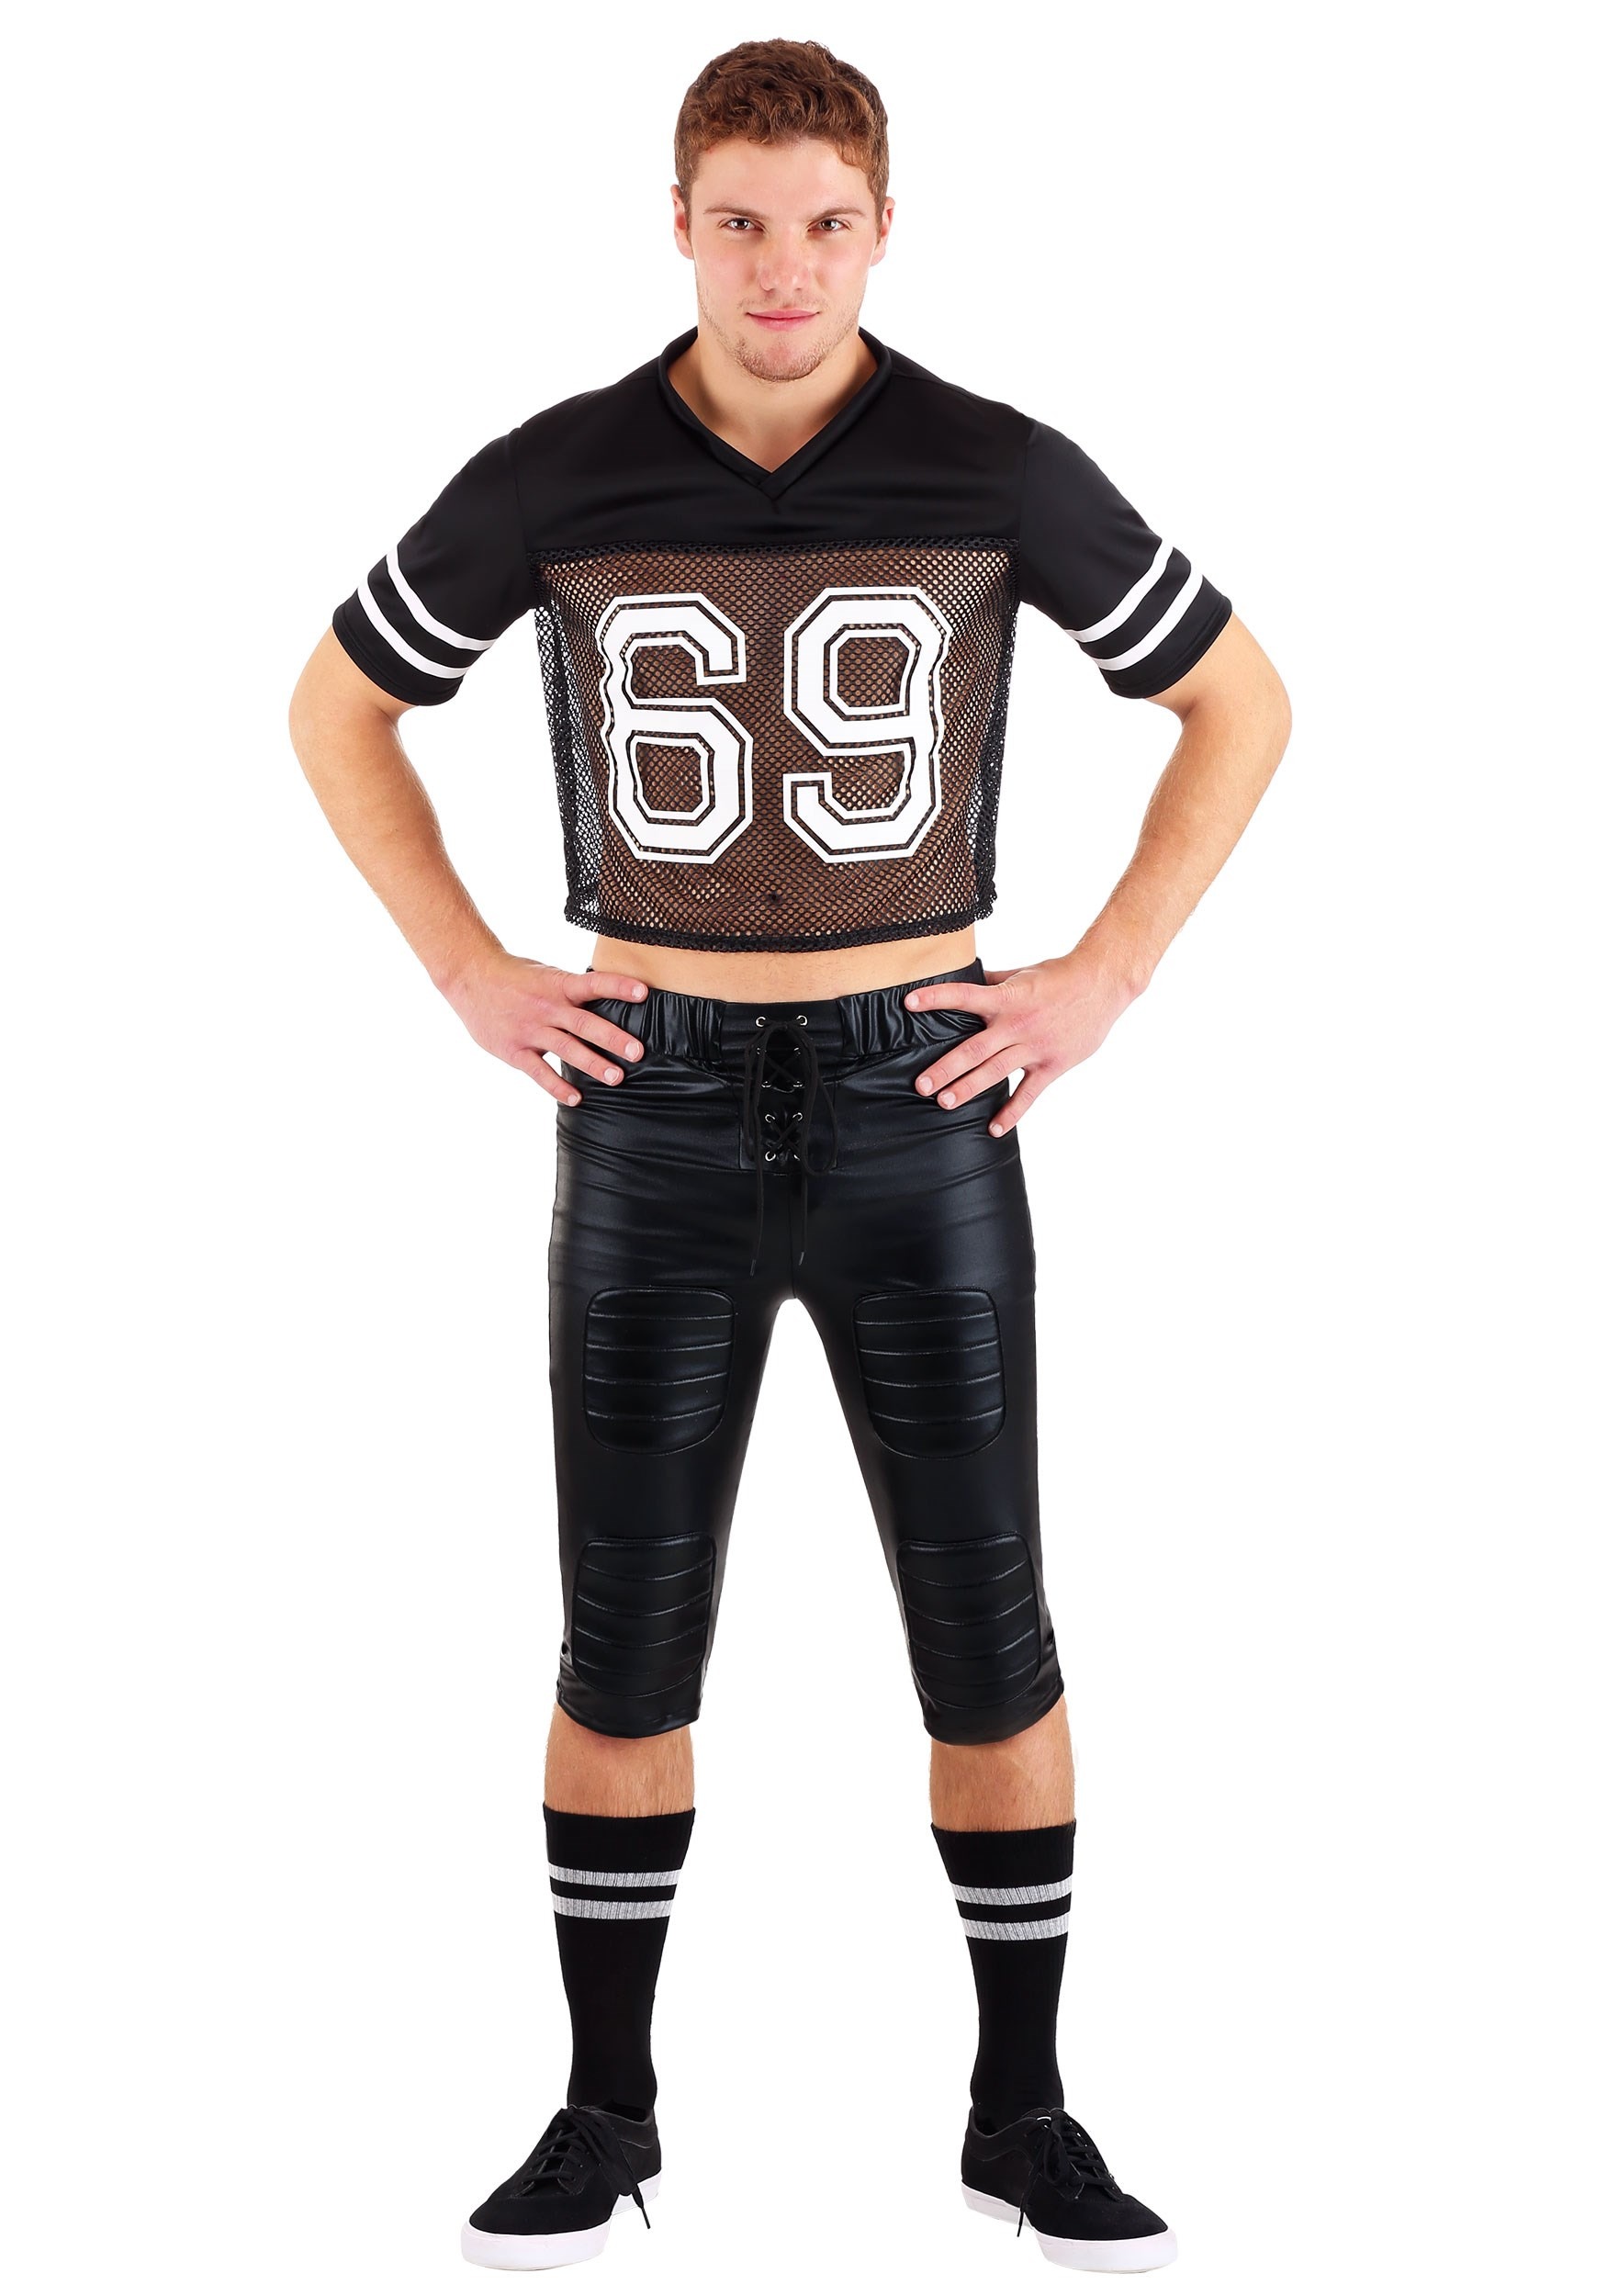 Photos - Fancy Dress FUN Costumes Tight End Footballer Costume for Adults Black